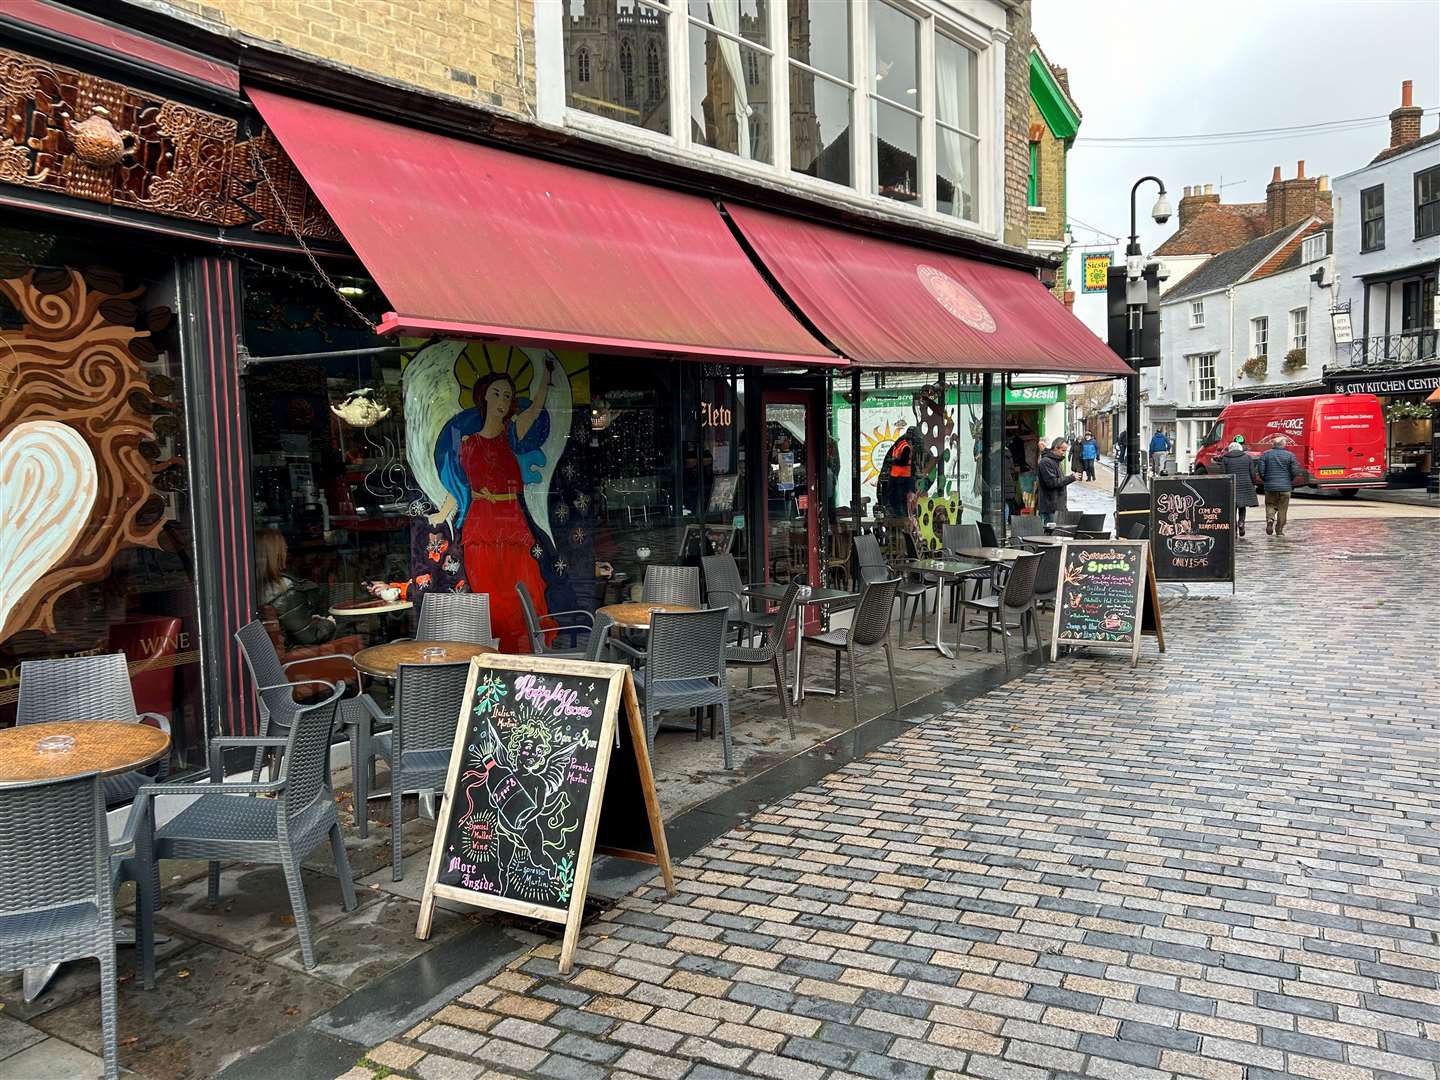 The Eleto Chocolate Cafe in Canterbury remains open under new ownership despite the closure of the Folkestone branch